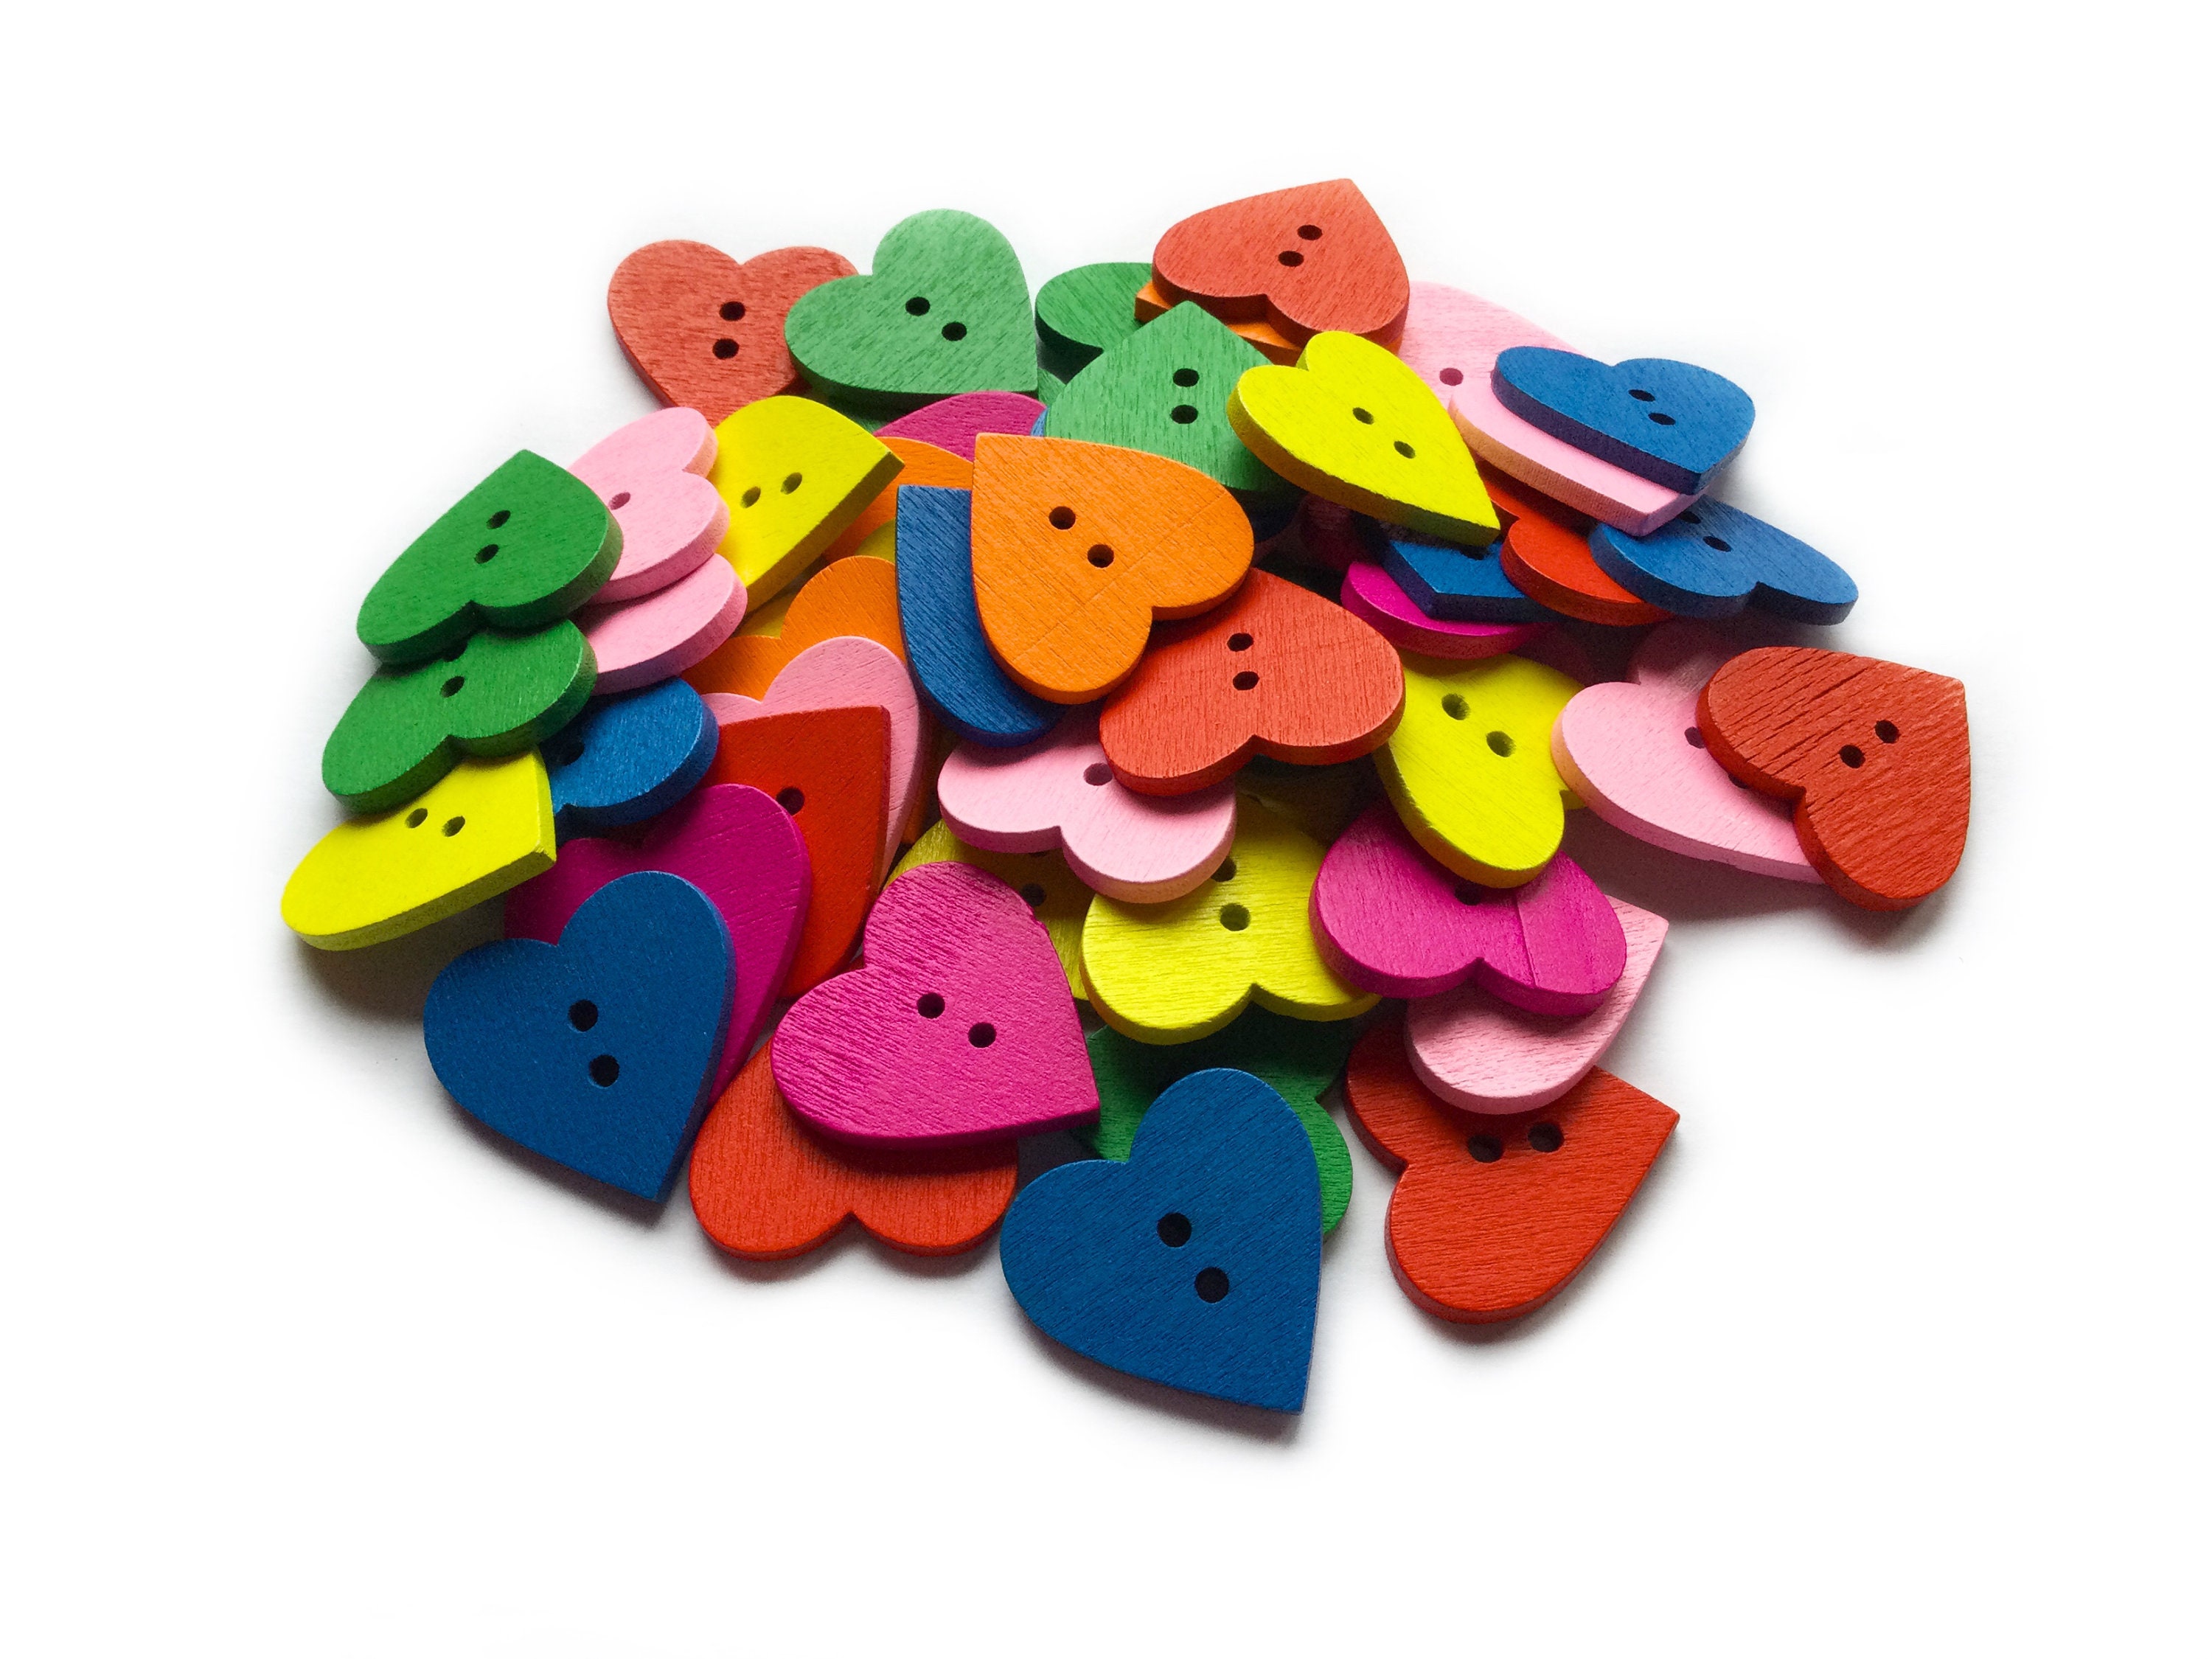 Premium PSD  Handcrafted heart shaped buttons painted on